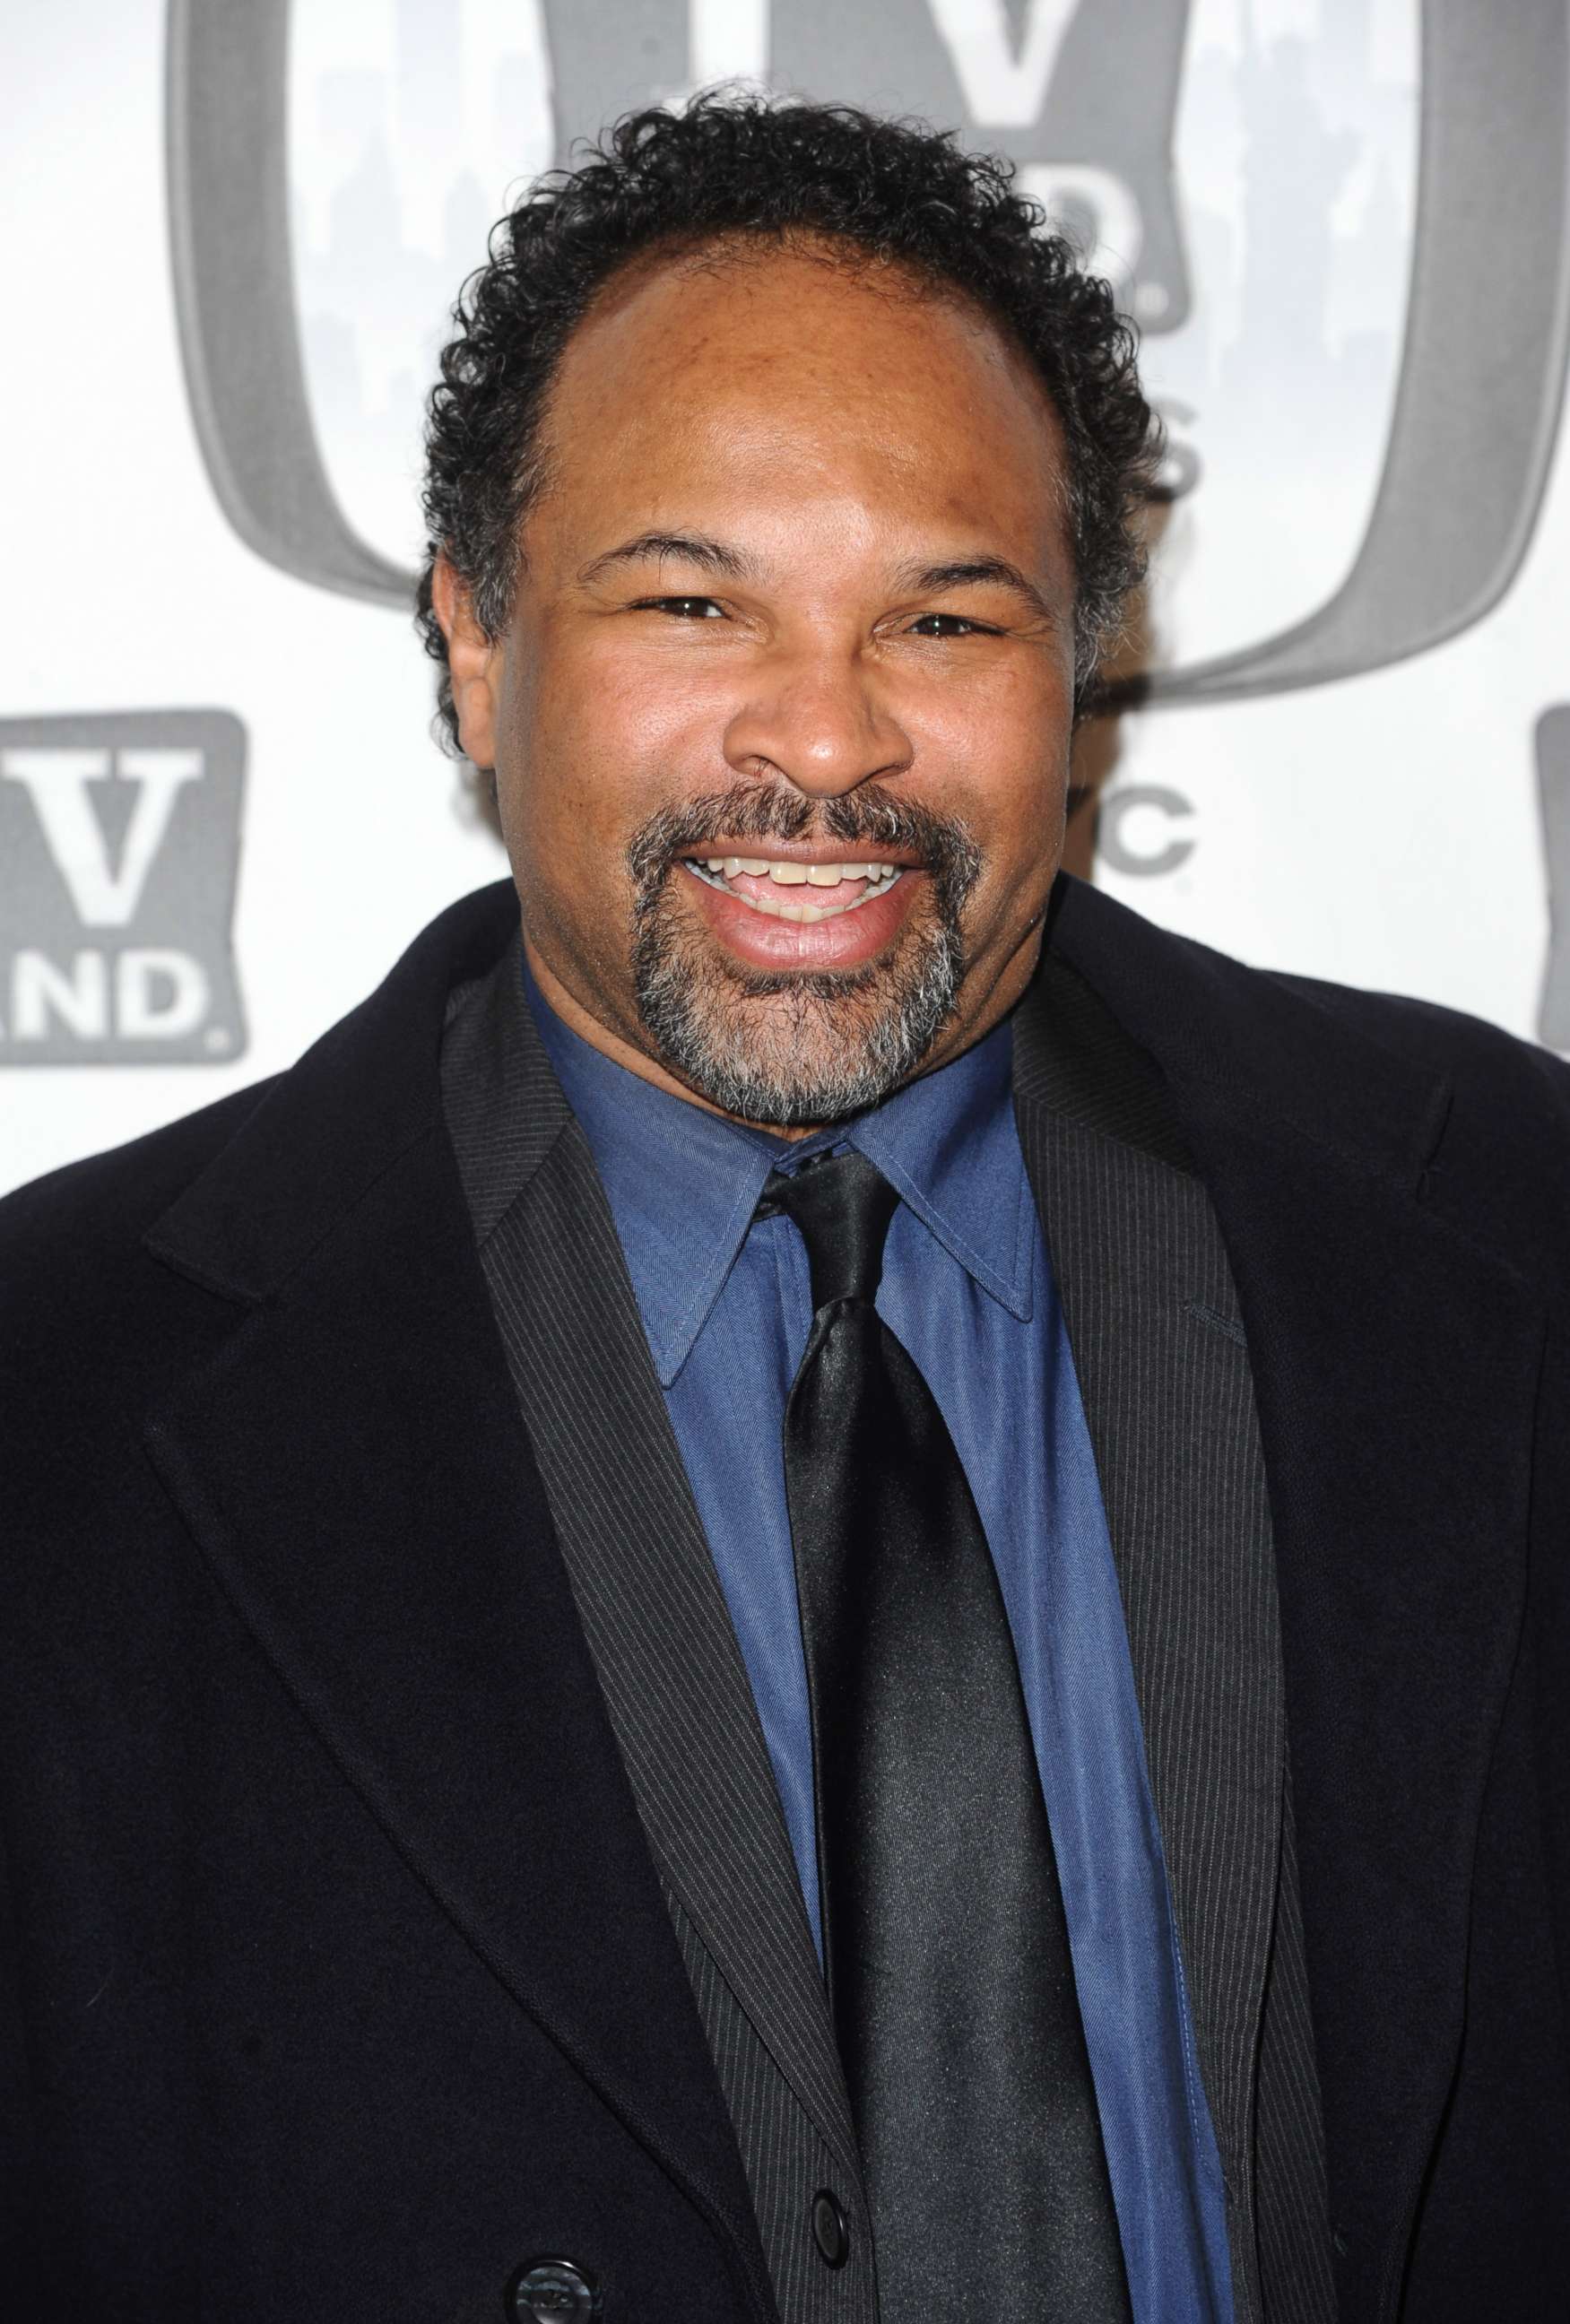 PHOTO: Geoffrey Owens arrives at the 2011 TV Land Awards, April 10, 2011, in New York.